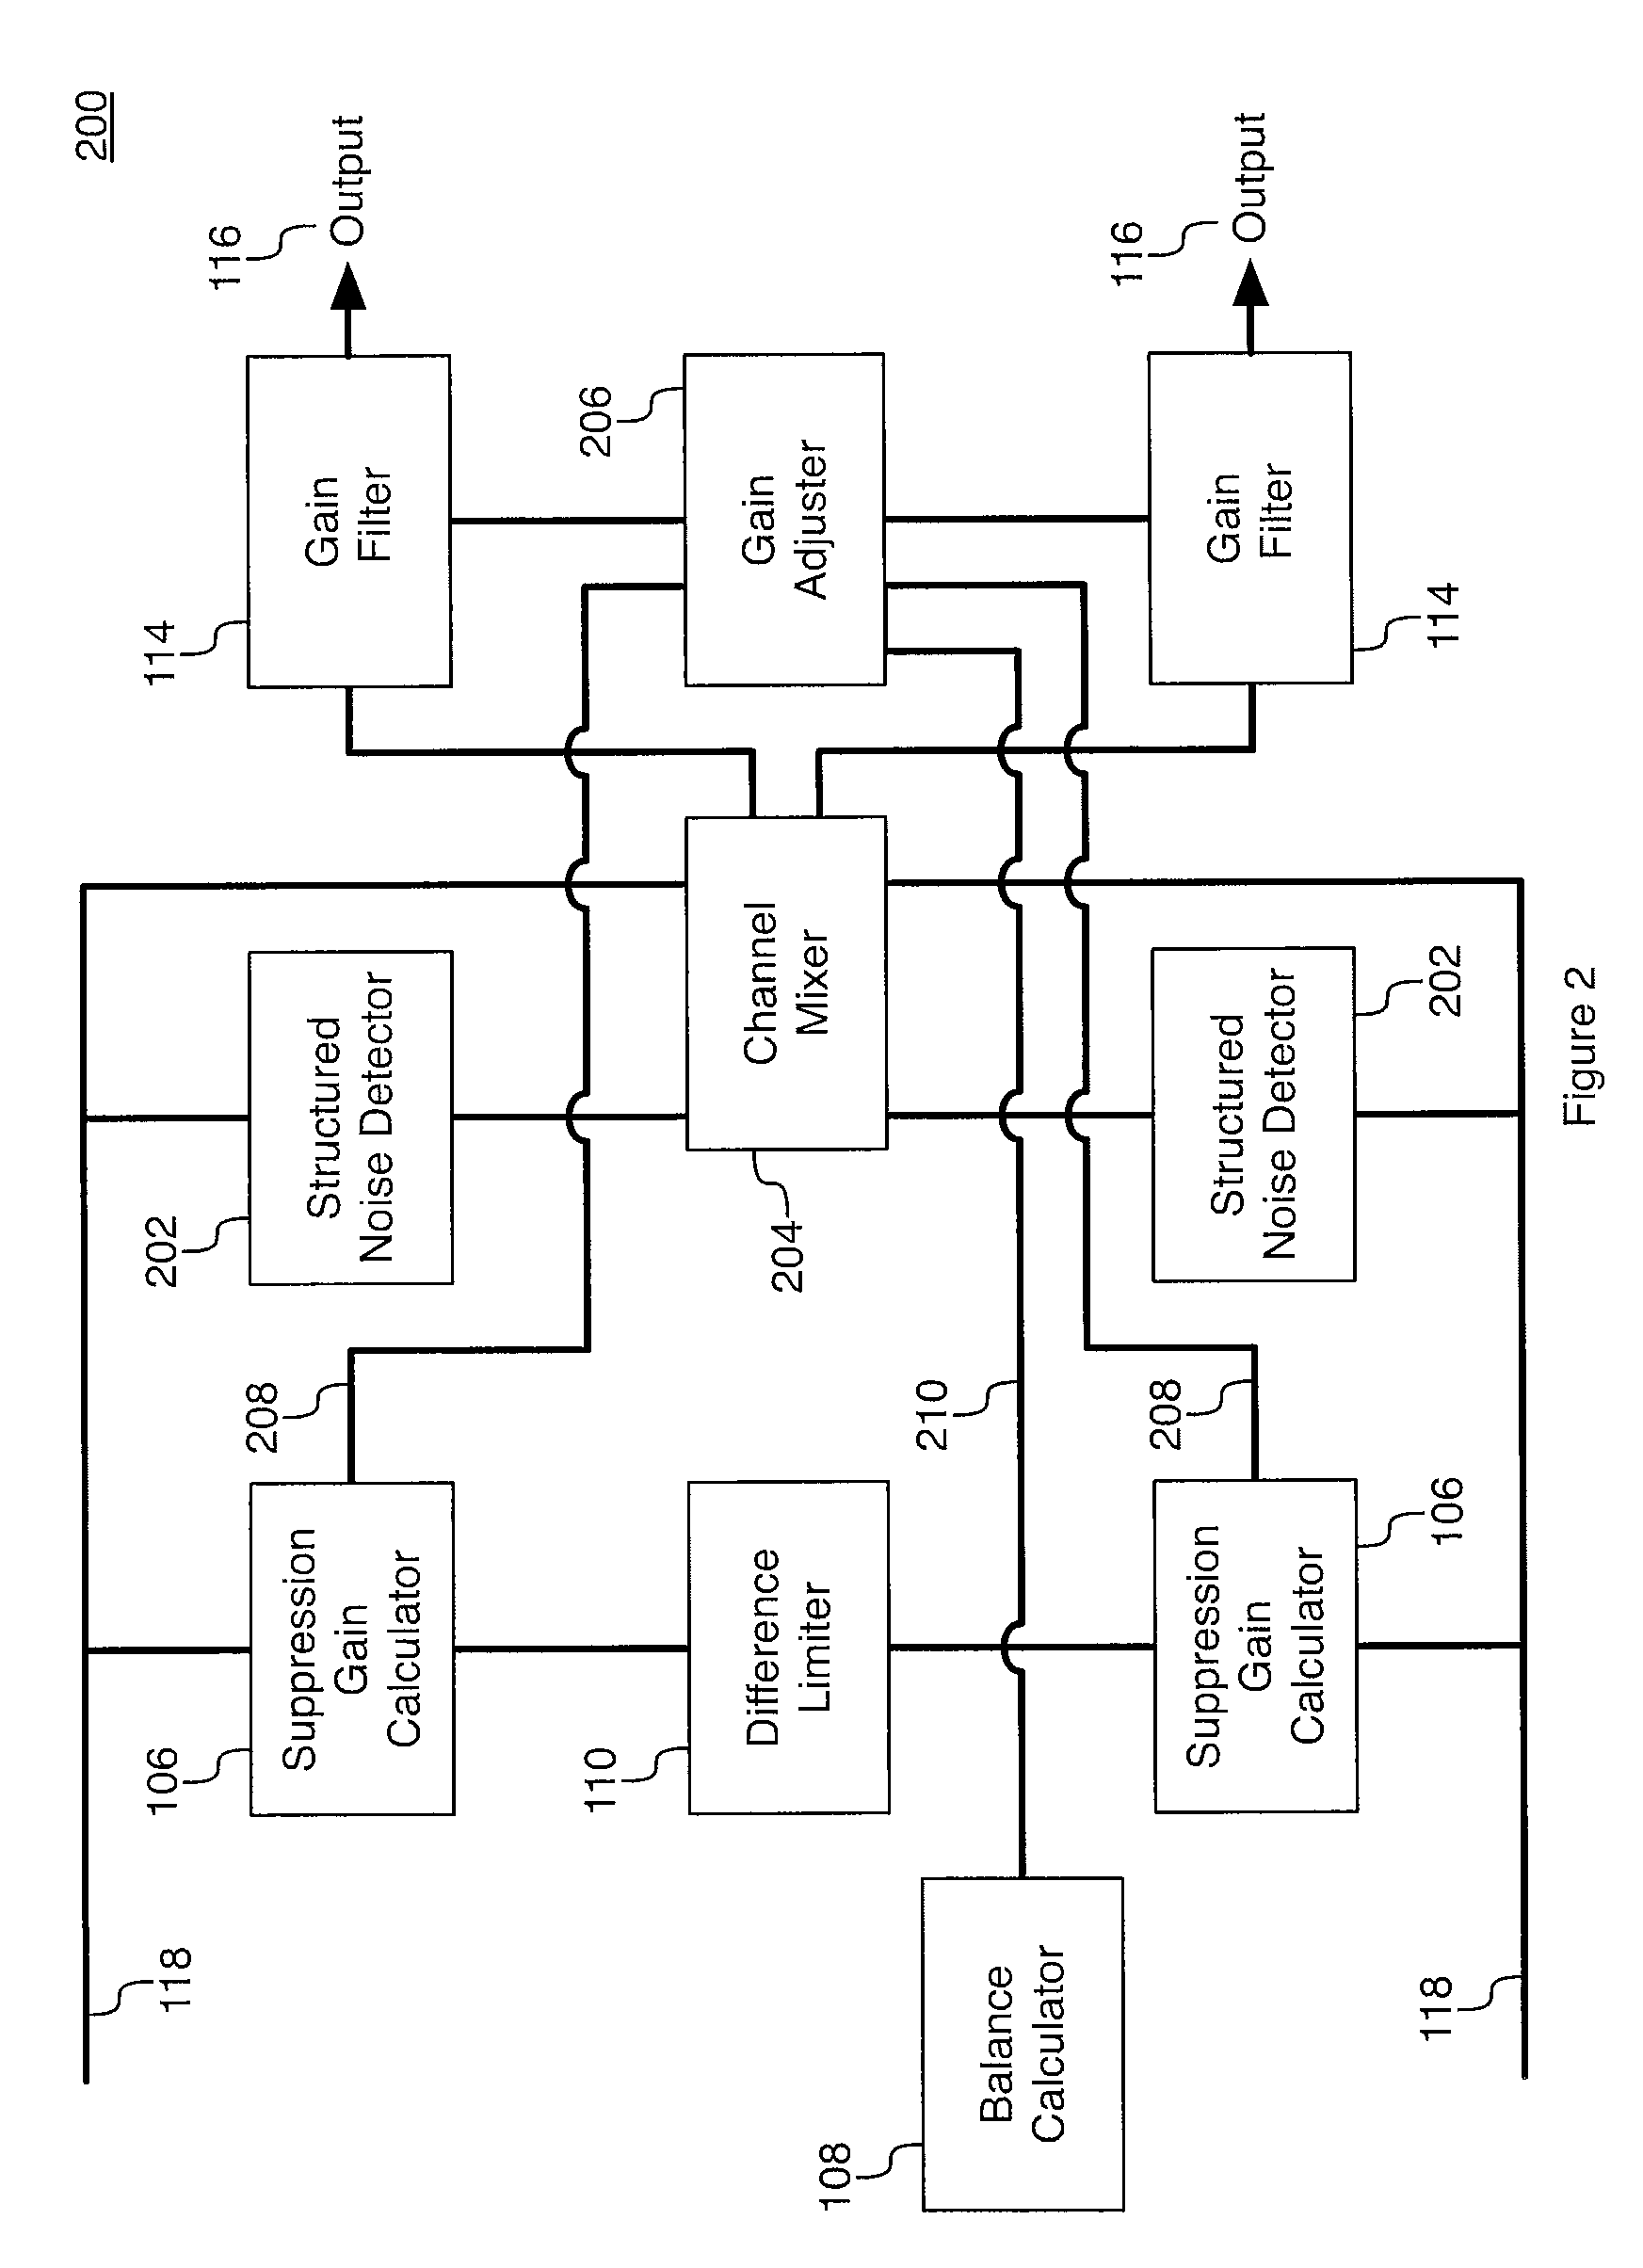 Sound field spatial stabilizer with echo spectral coherence compensation